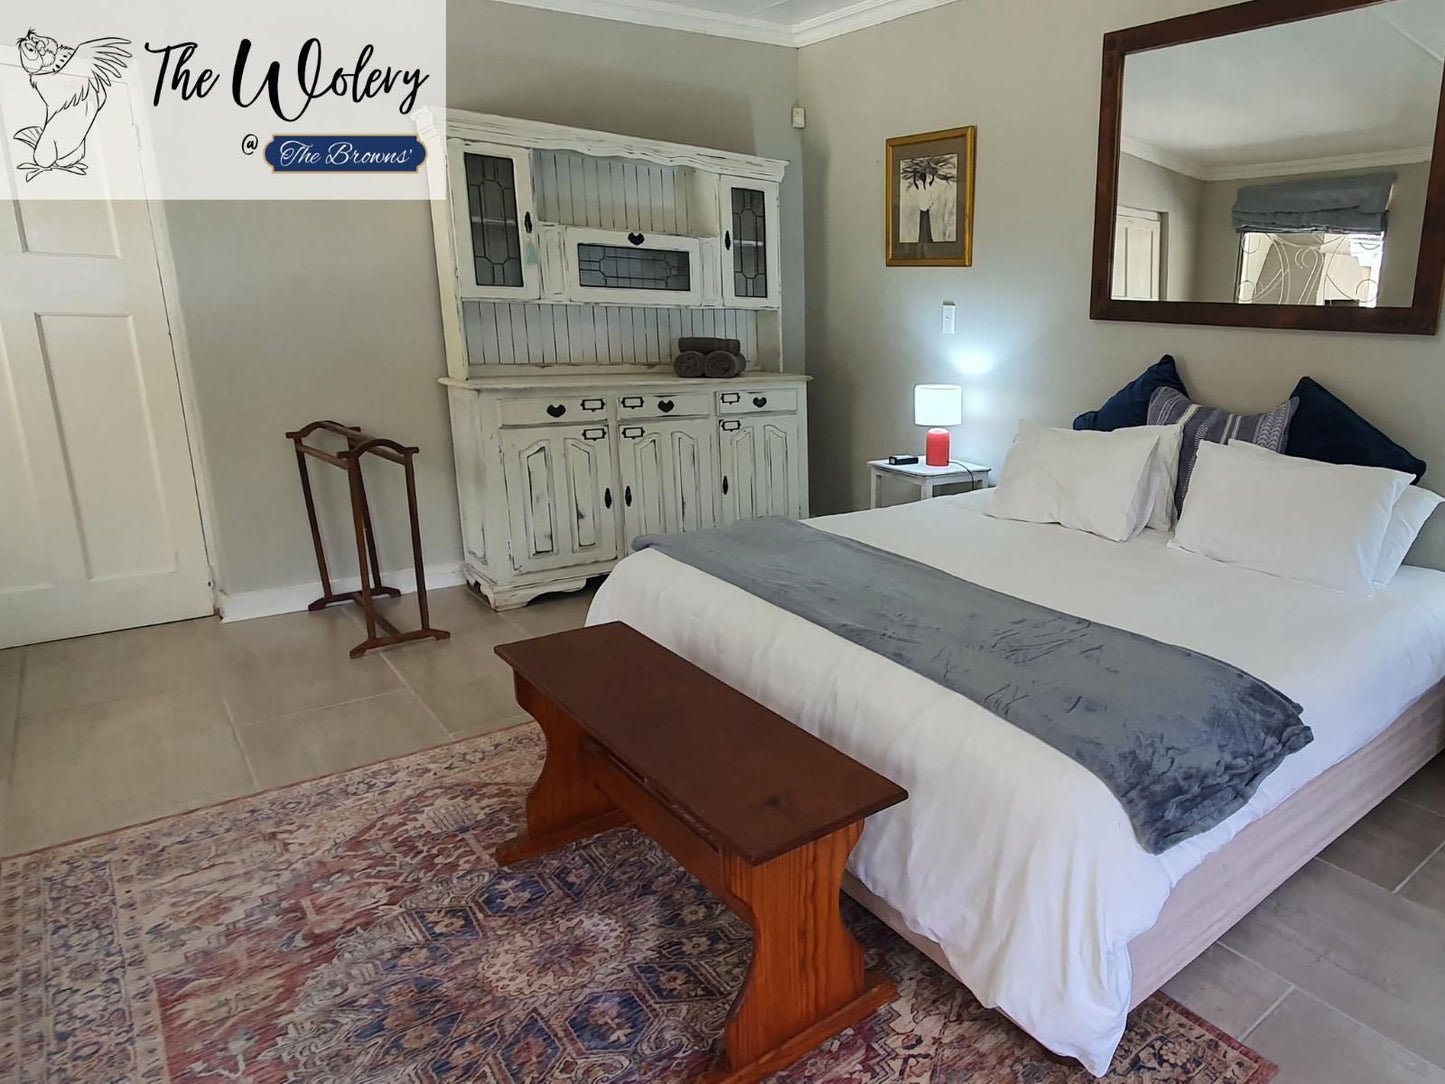 The Browns Luxury Guest Suites Dullstroom Mpumalanga South Africa Bedroom